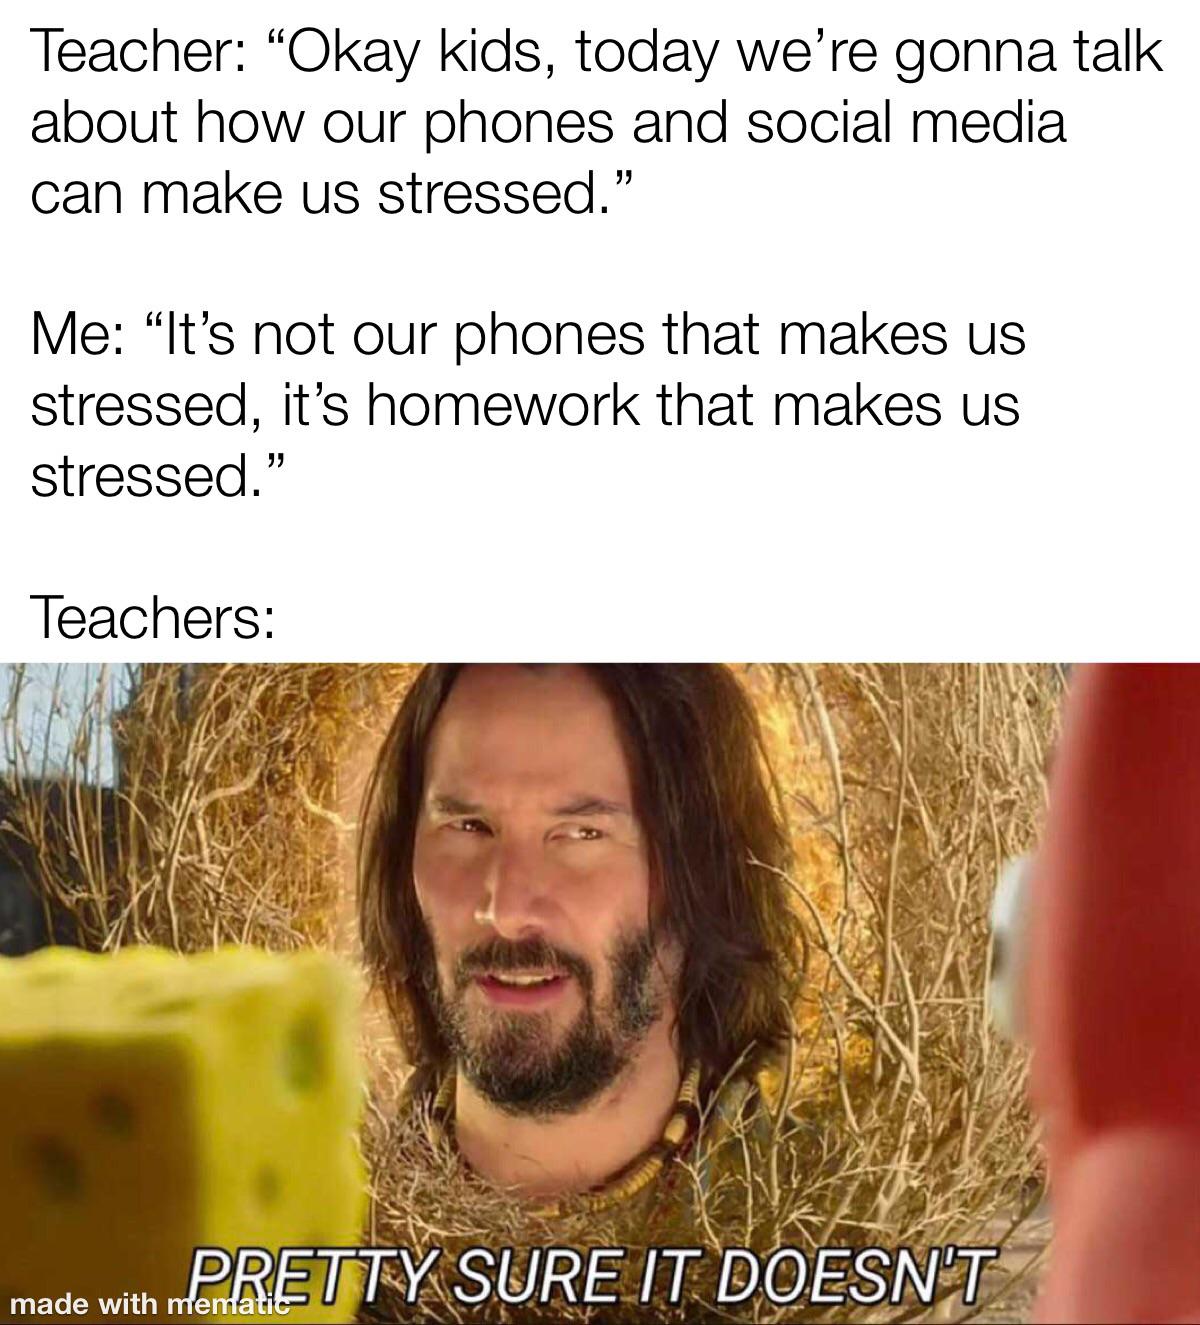 daily dose of memes - photo caption - Teacher "Okay kids, today we're gonna talk about how our phones and social media can make us stressed." Me "It's not our phones that makes us stressed, it's homework that makes us stressed." Teachers Pretty Sure It Do